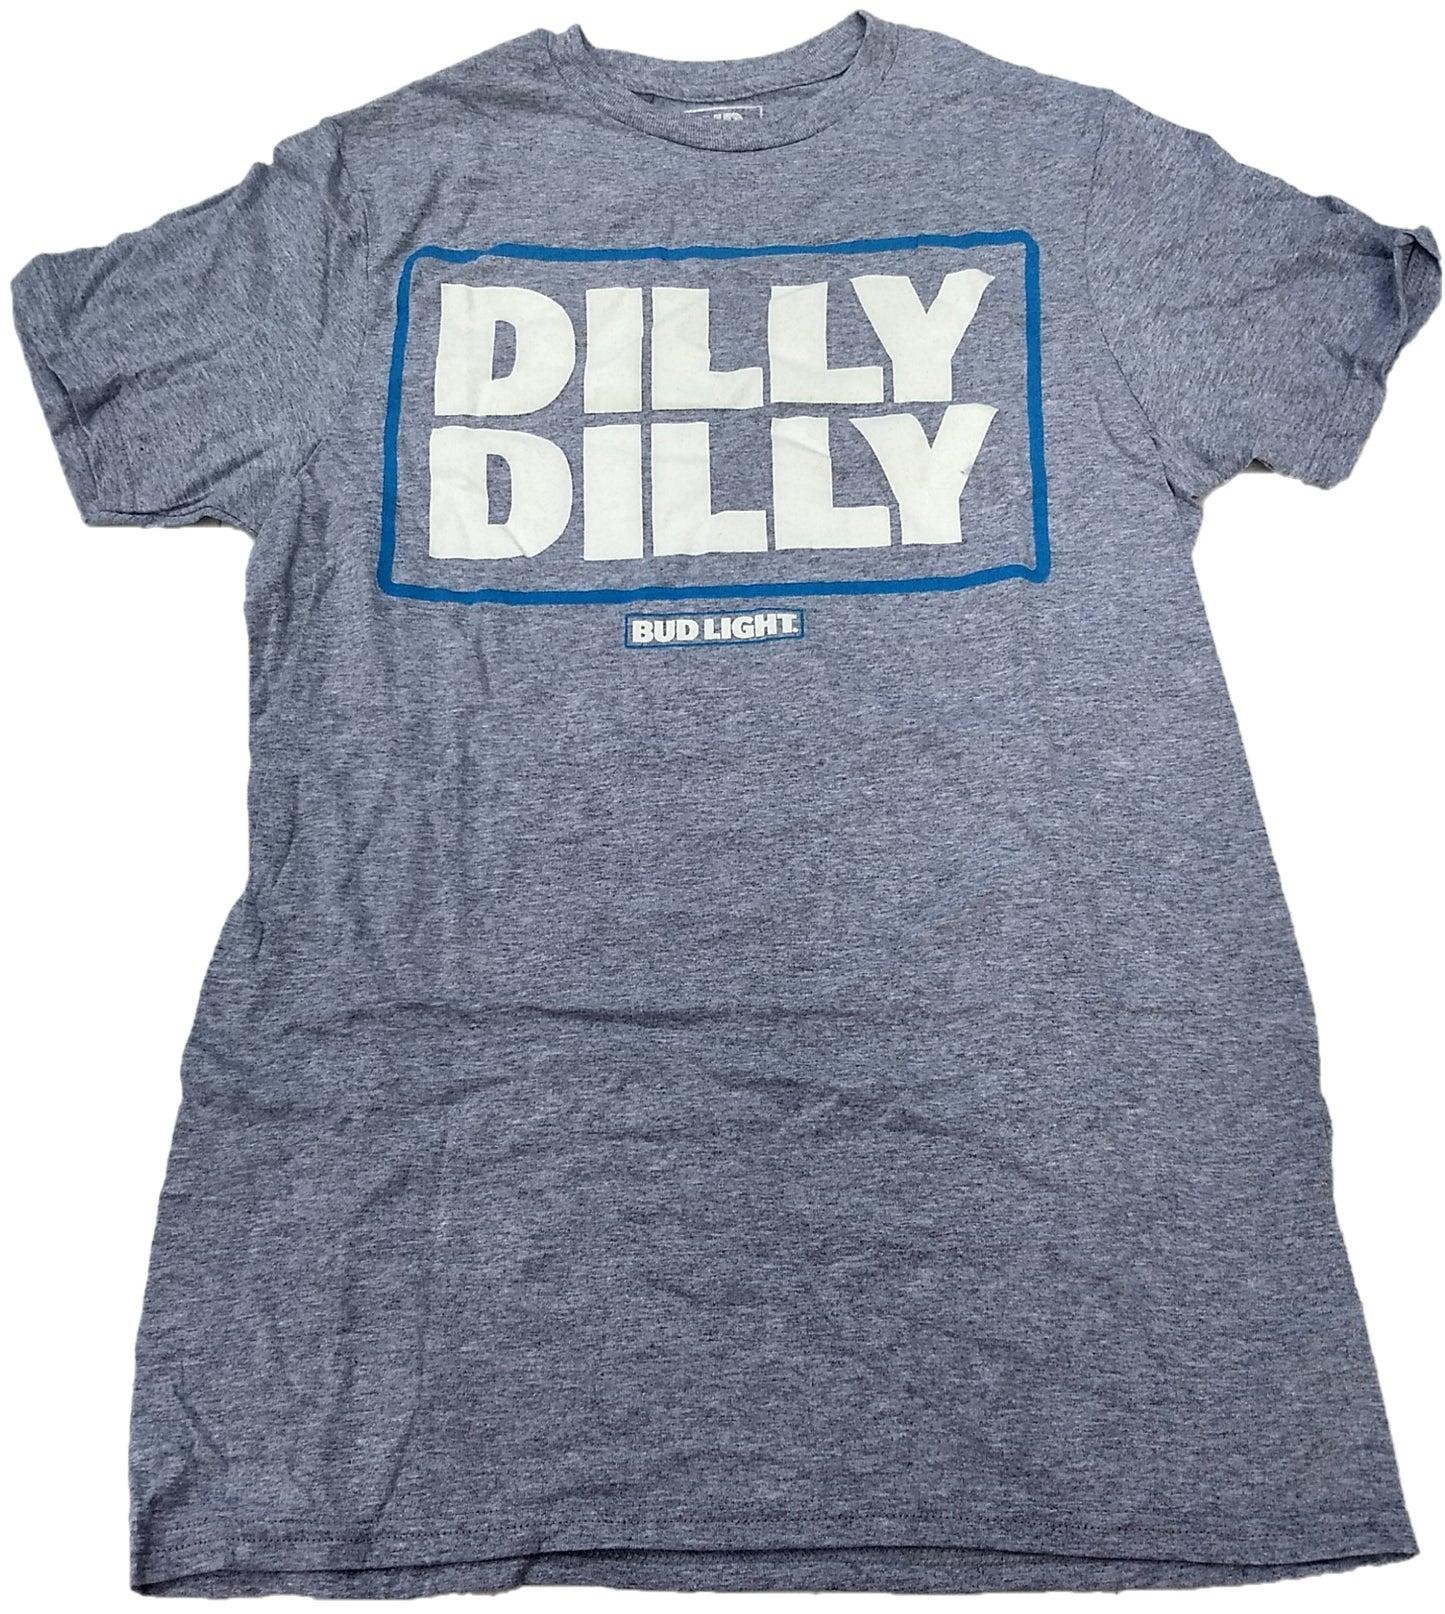 Dilly Dilly Bud Light Budweiser Beer Lager Mens T-Shirt (Grey)